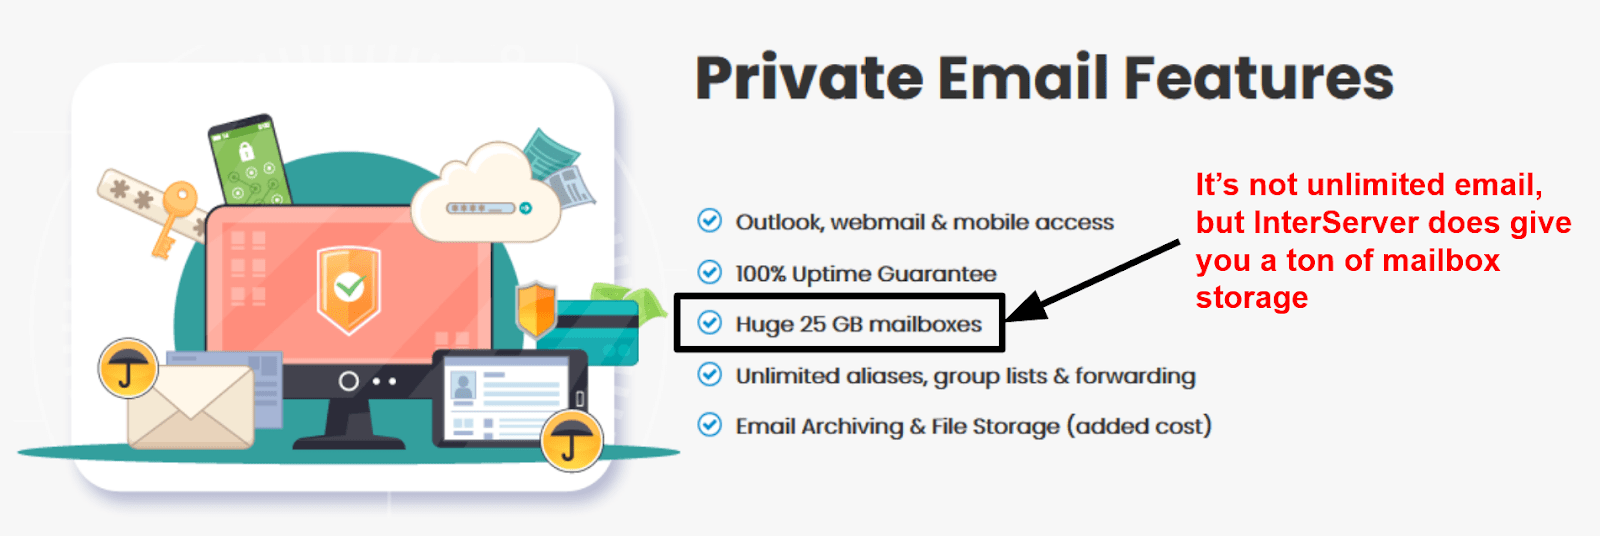 InterServer email features